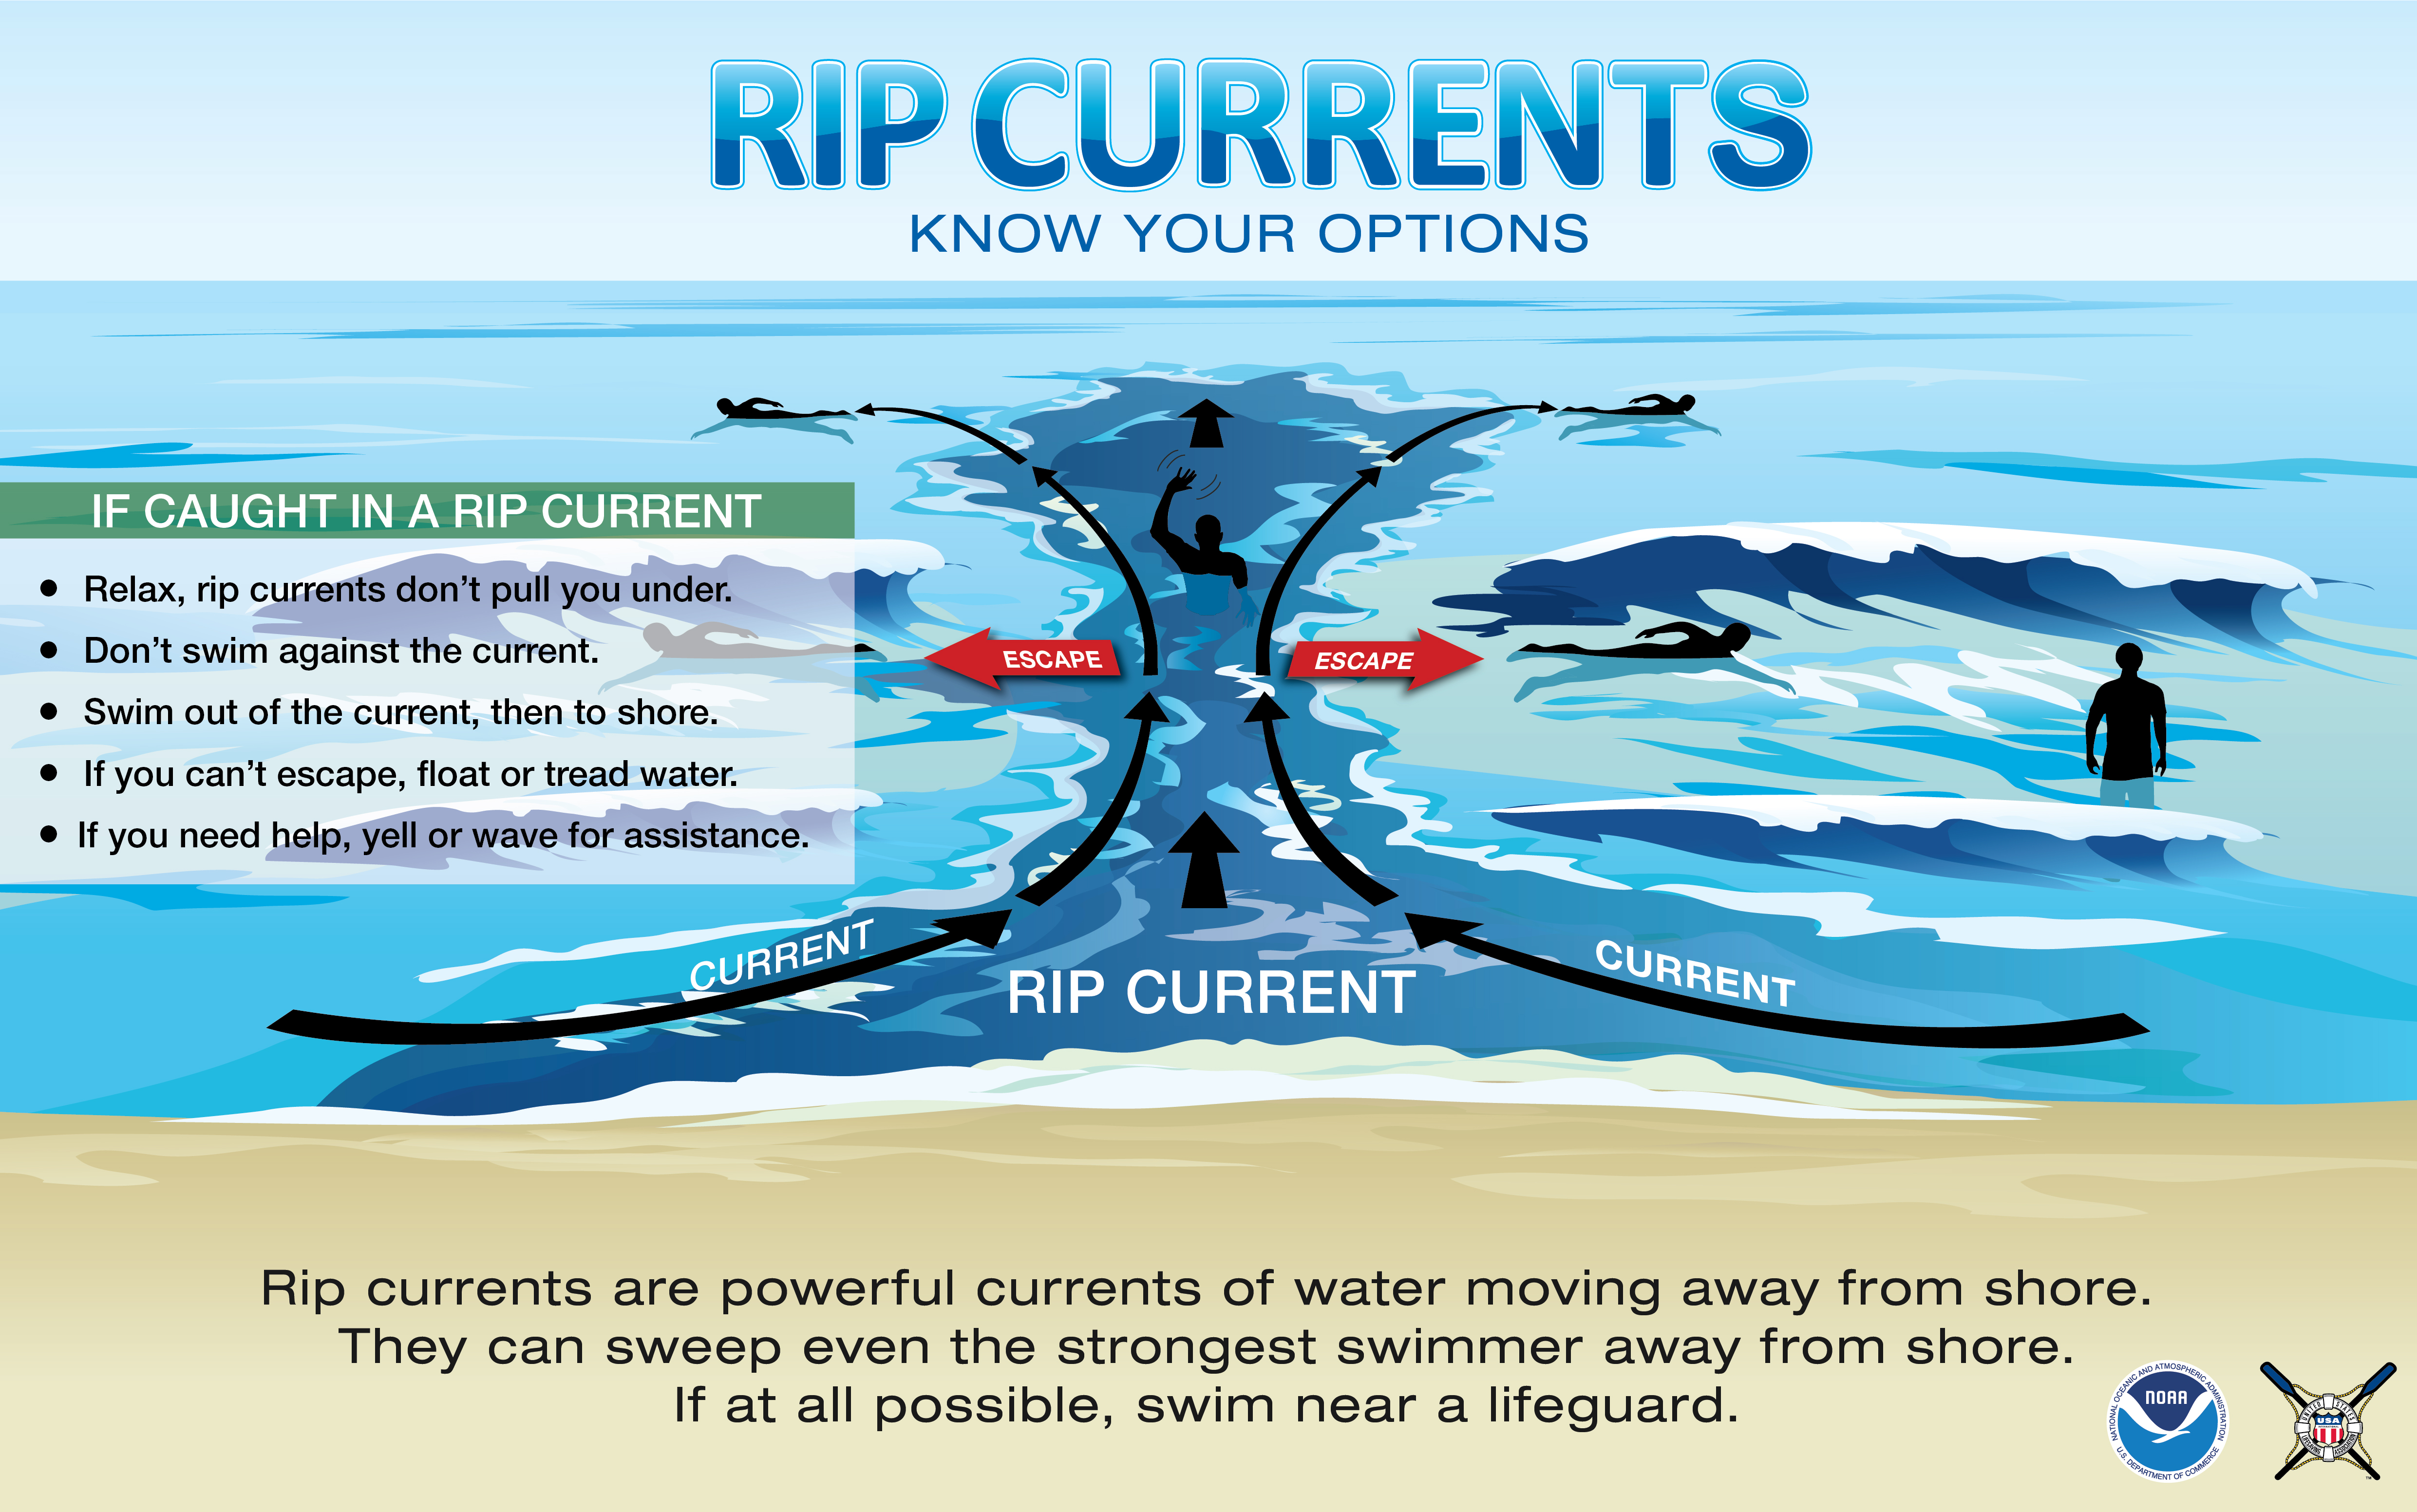 Rip currents are powerful currents of water moving away from shore. They can sweep even the strongest swimmer out to sea. If caught in a rip current: 1. Don't fight the current. 2. Swim out of the current, then to shore. 3. If you can't escape, float or tread water. 4. If you need help, call or wave for assistance.